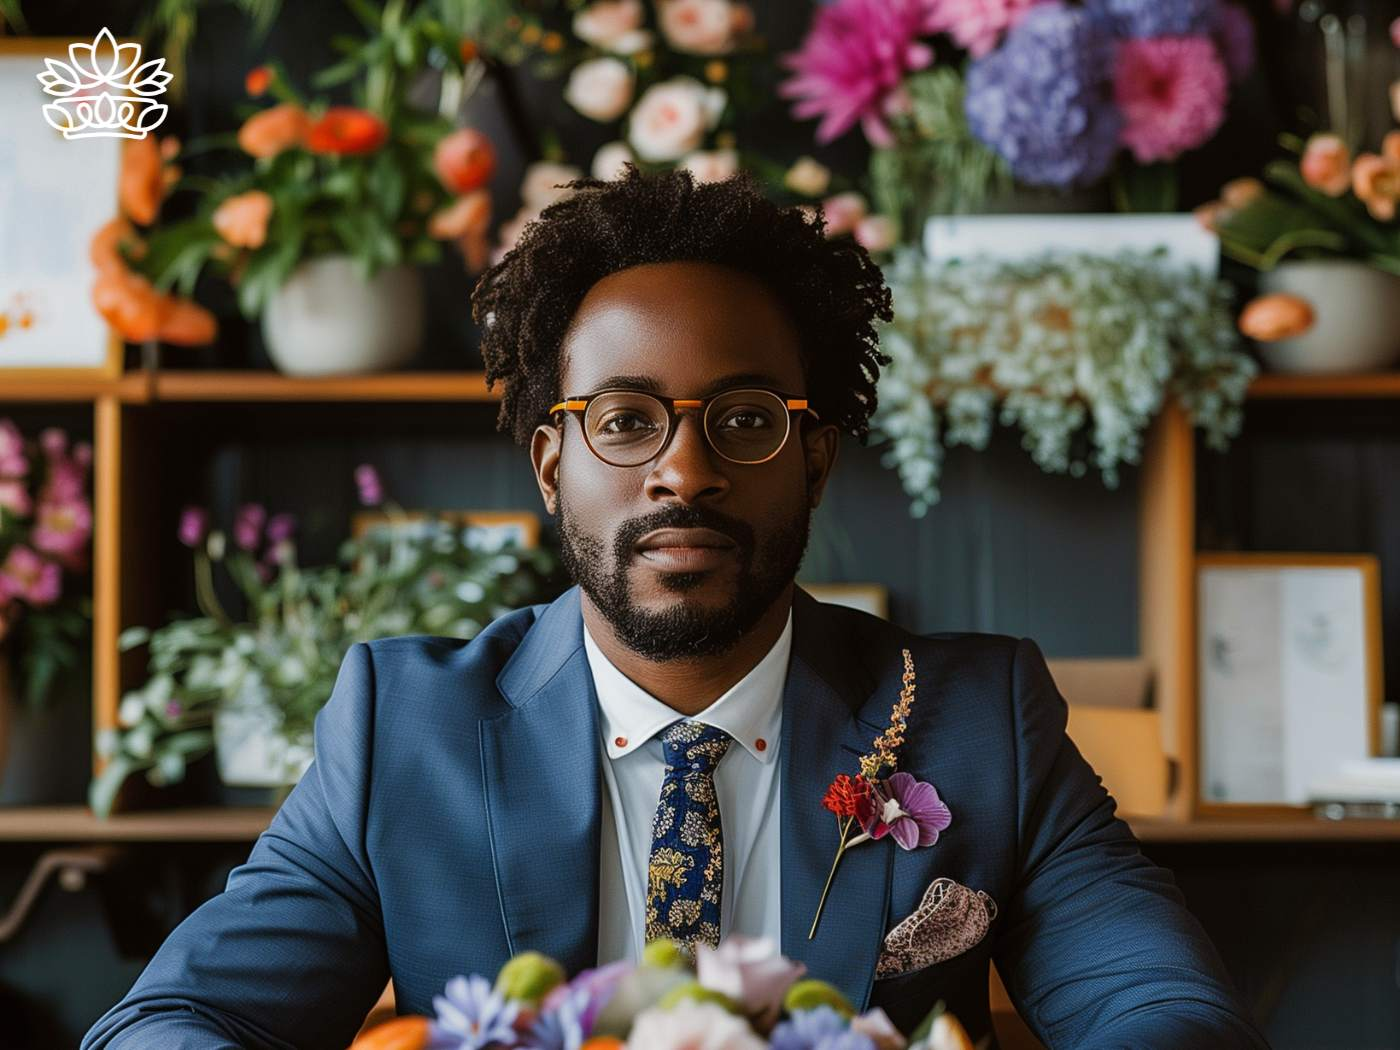 Confident CEO surrounded by lush flower arrangements and air plants suited for minimal light in an office setting, representing the stylish range from Fabulous Flowers and Gifts.